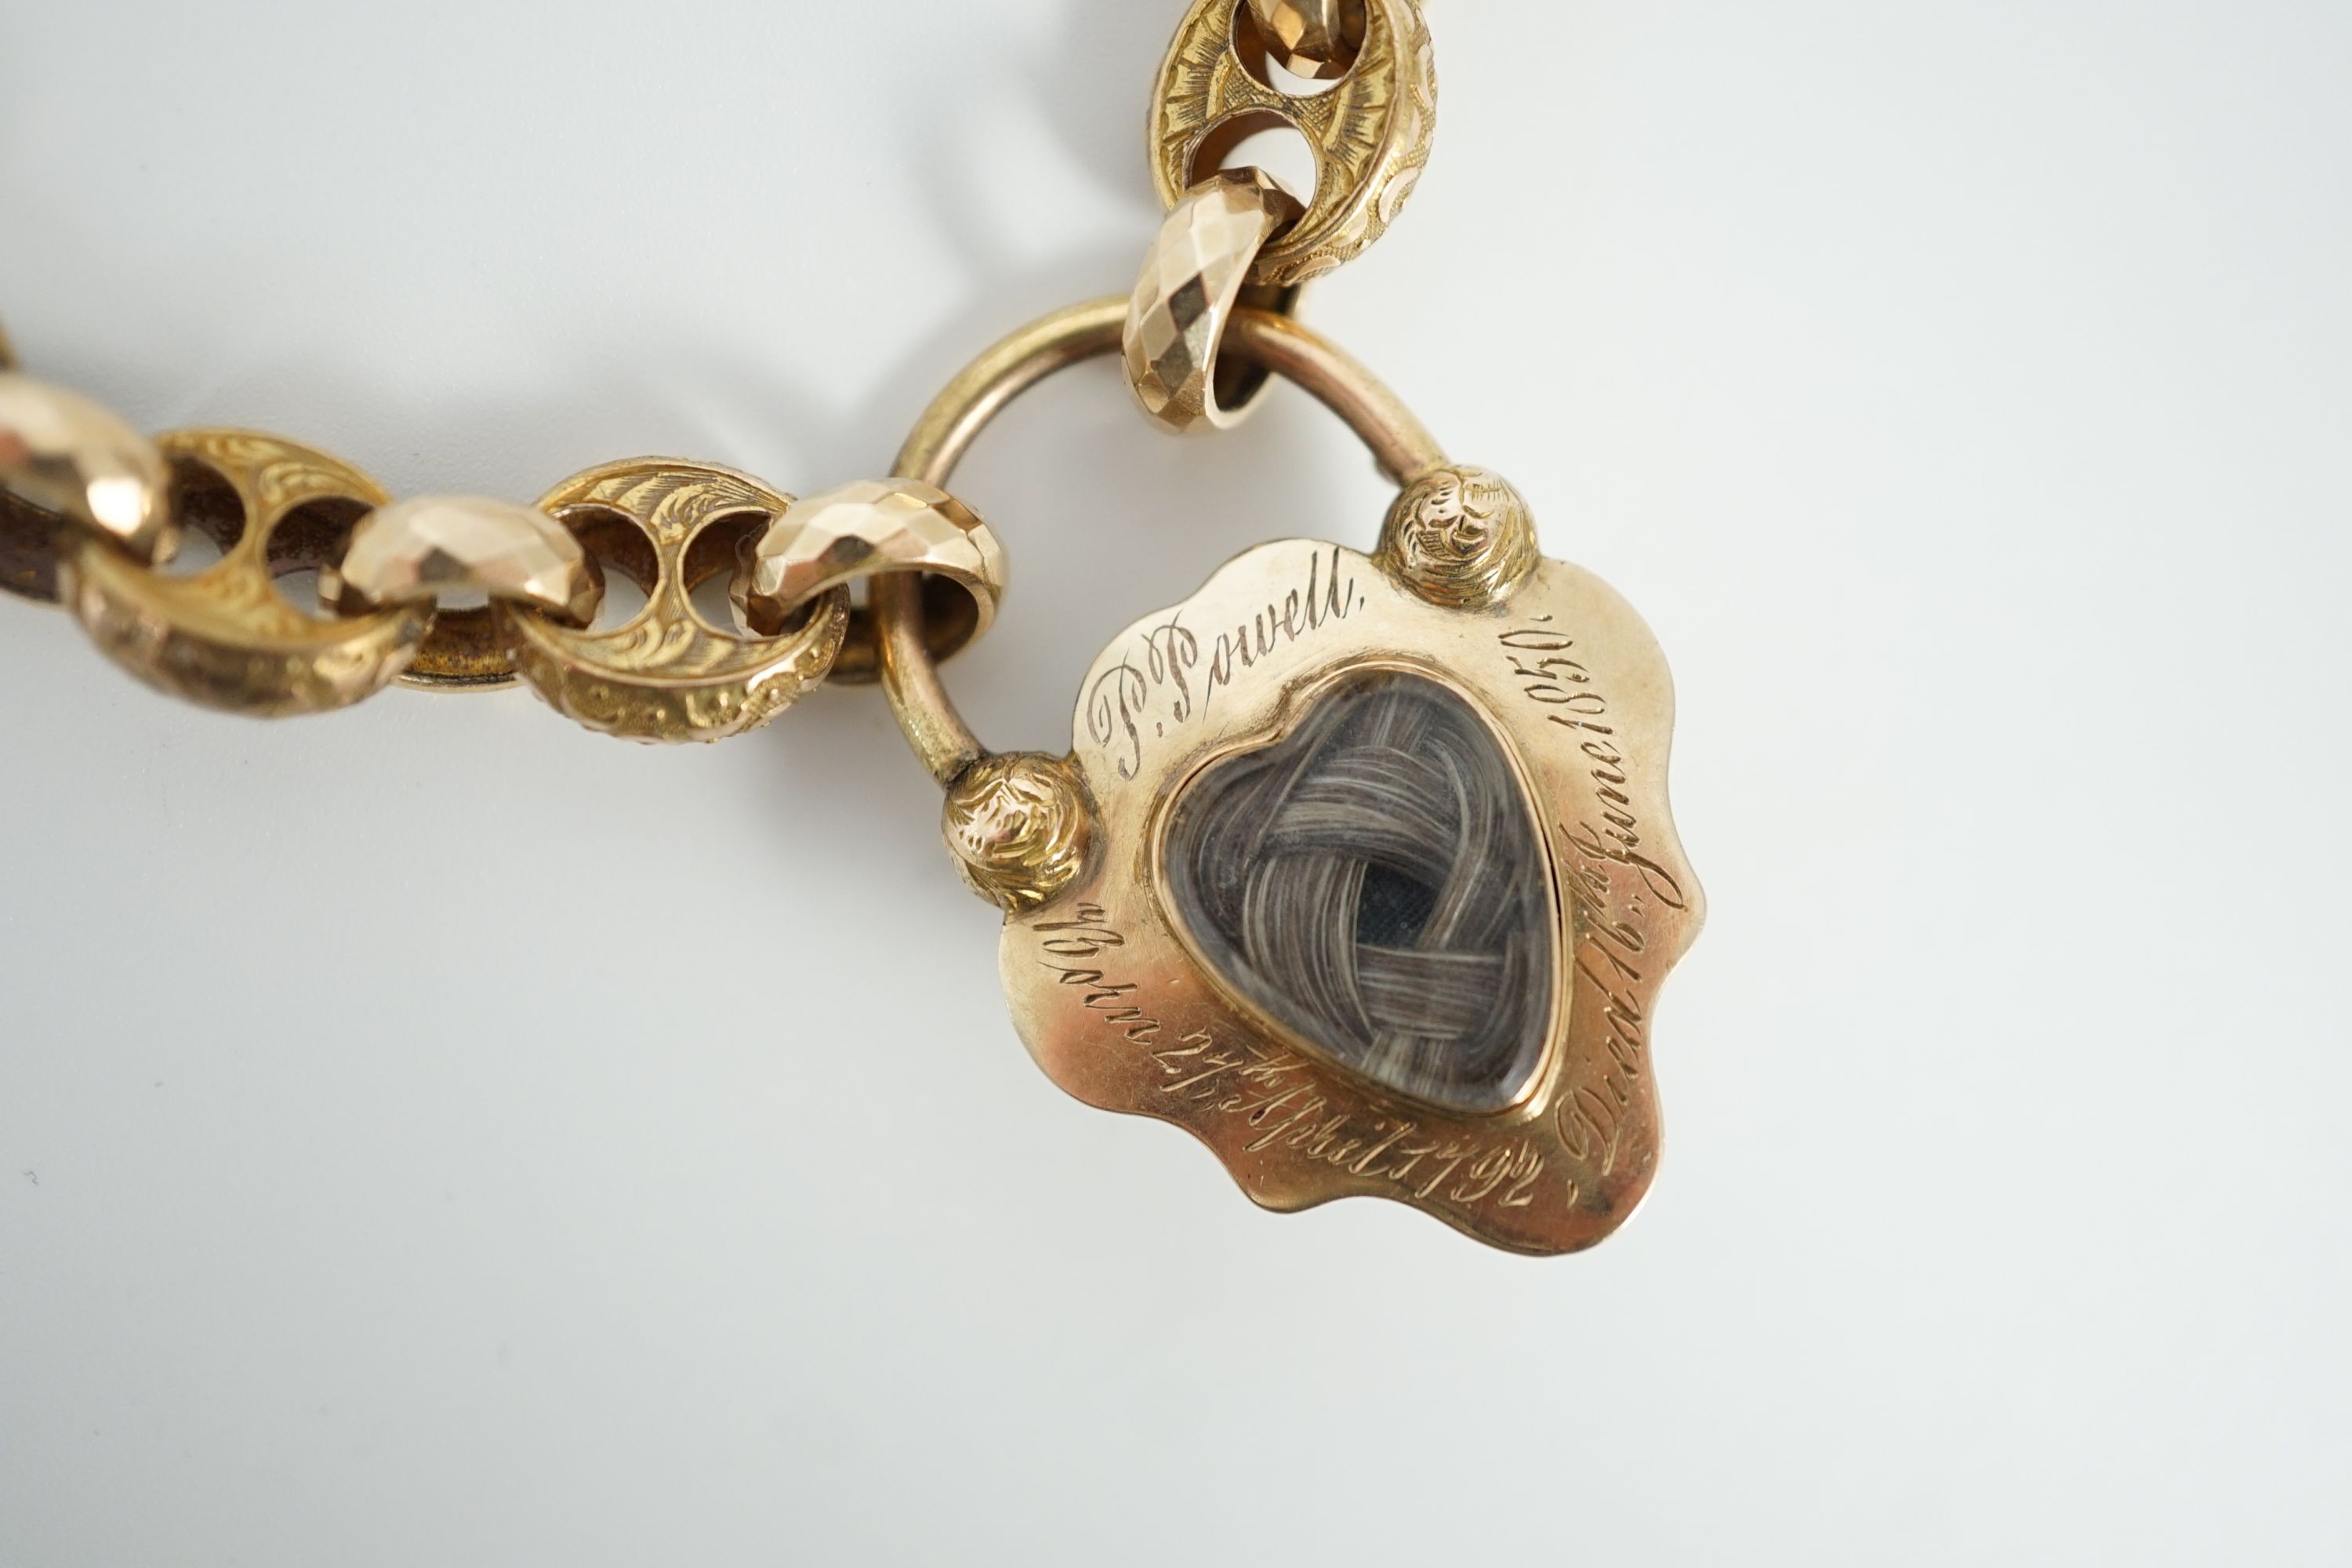 A Victorian engraved and facetted link gold mourning bracelet, with pear shaped foil backed? garnet set heart shape padlock